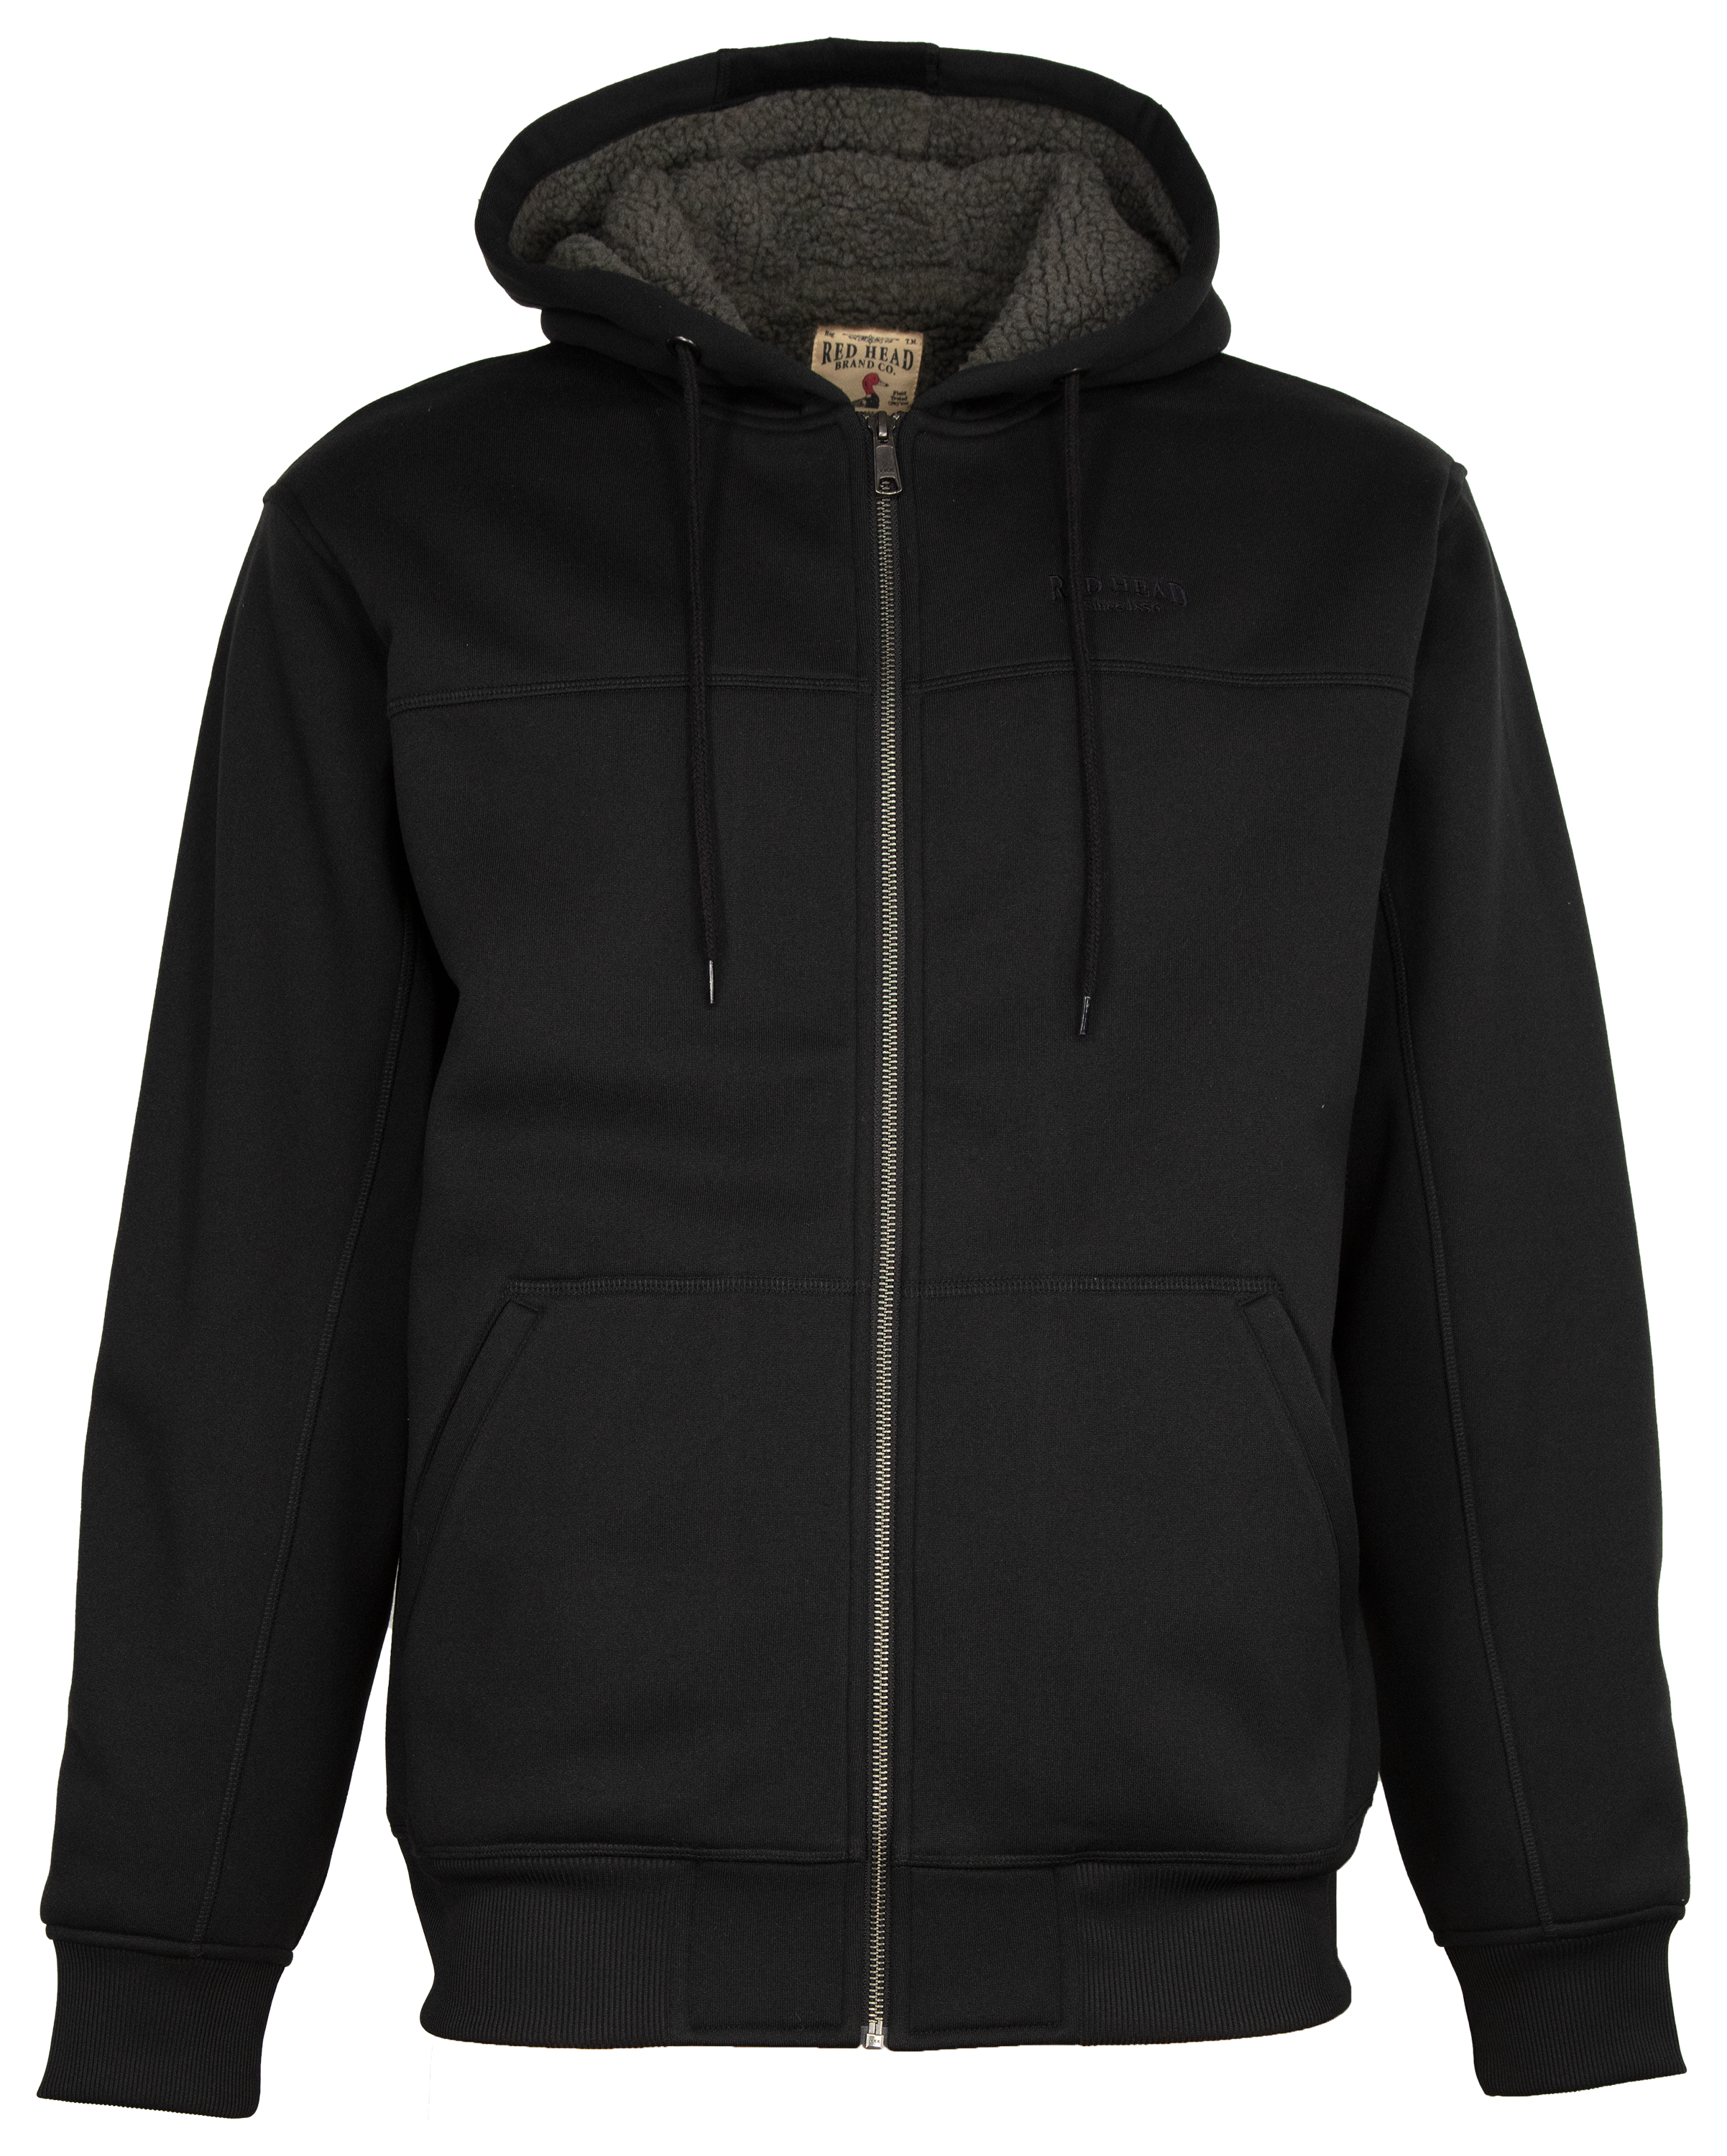 RedHead Sherpa-Lined Full-Zip Jacket for Men